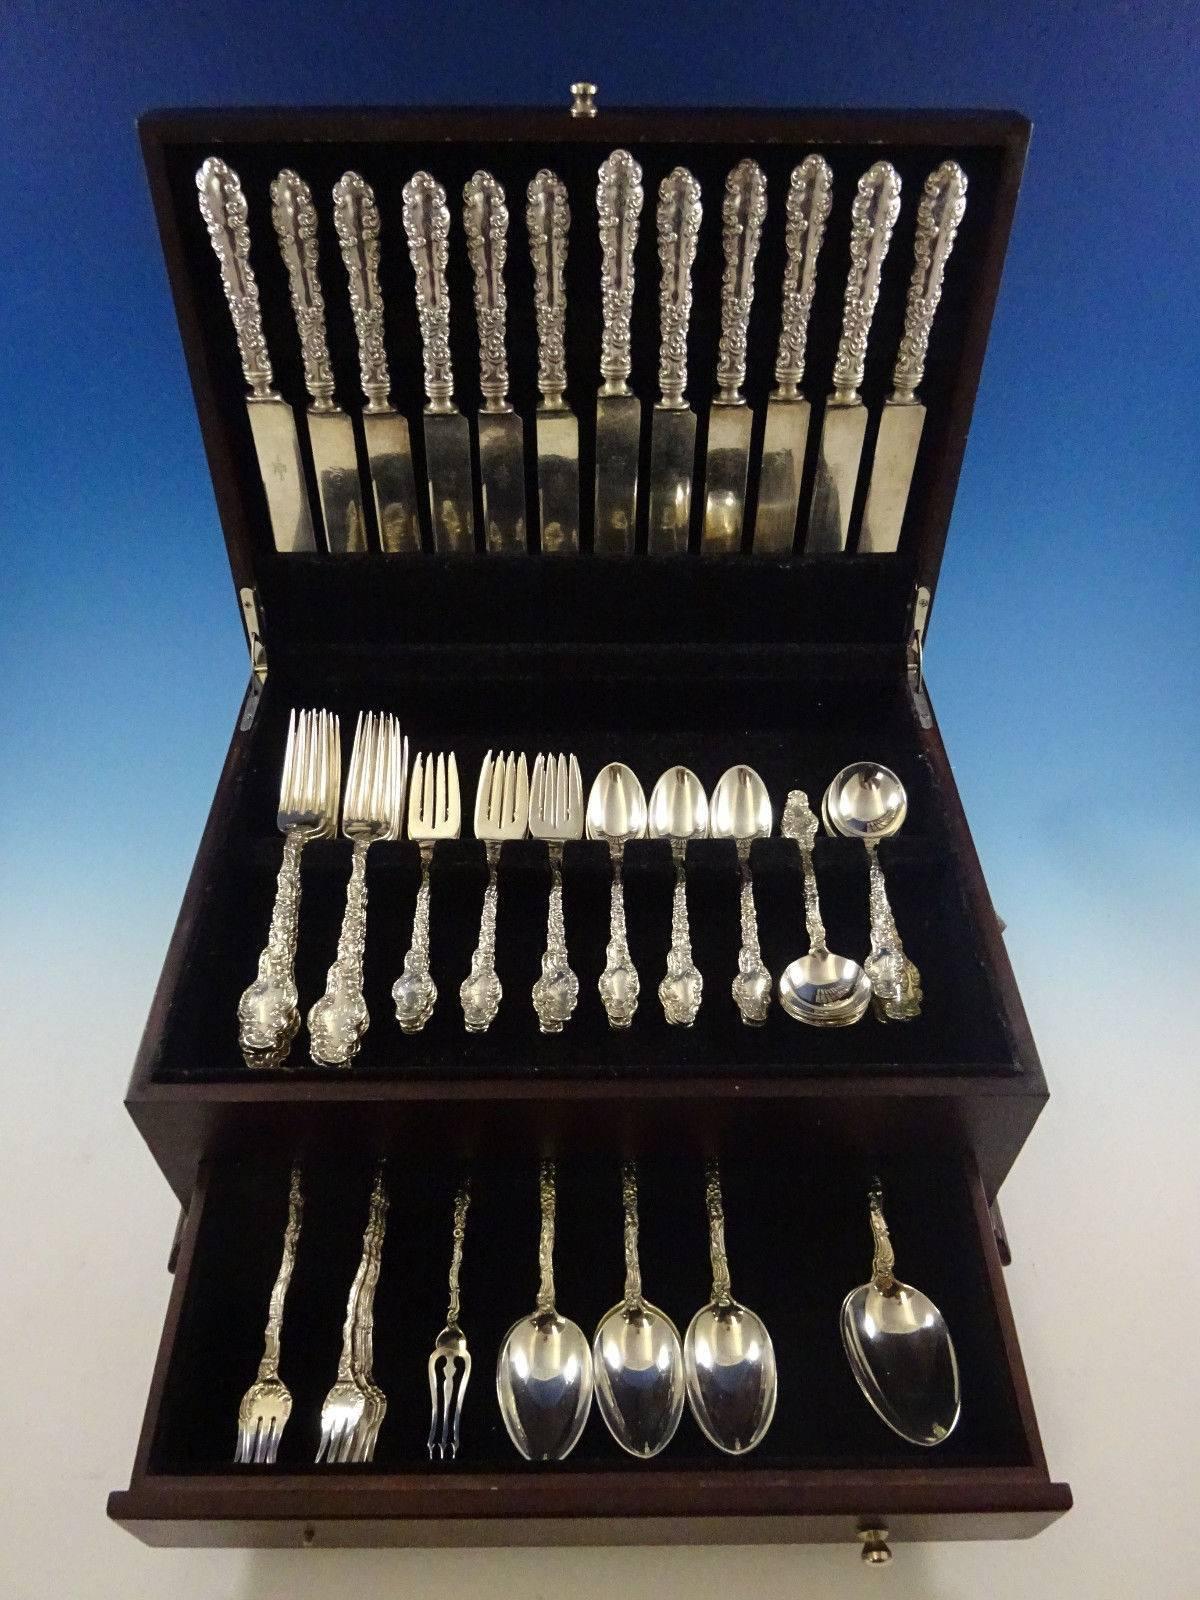 Watteau by Durgin sterling silver dinner size flatware set - 86 pieces. 

This set includes:

12 Dinner knives, blunt silver plated blades, 9 5/8